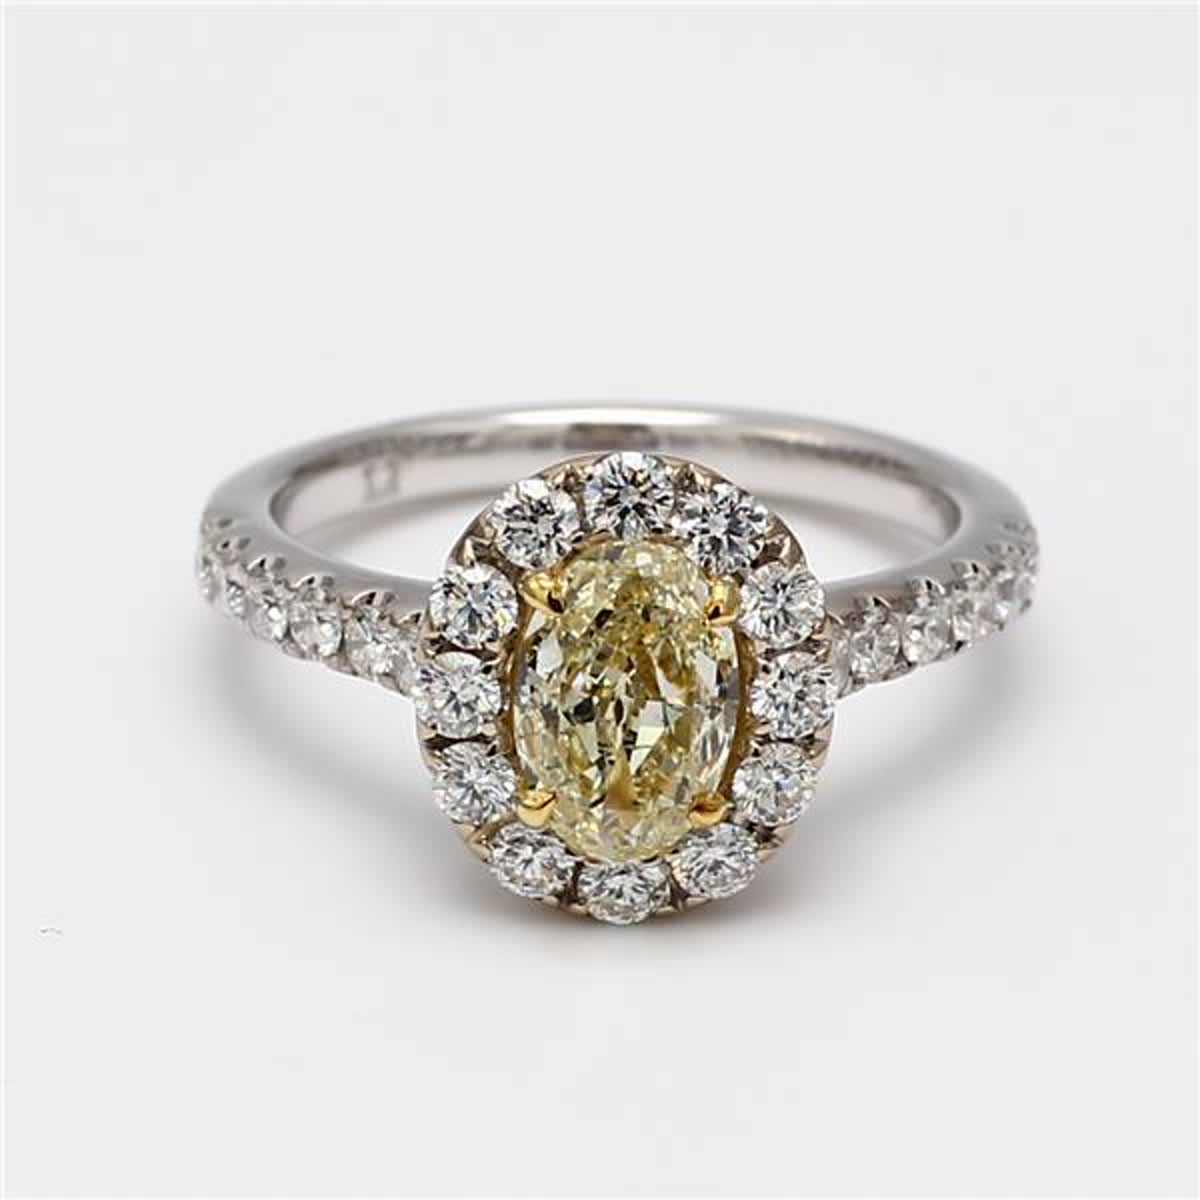 GIA Certified Natural Yellow Oval and White Diamond 1.83 Carat TW Gold Ring